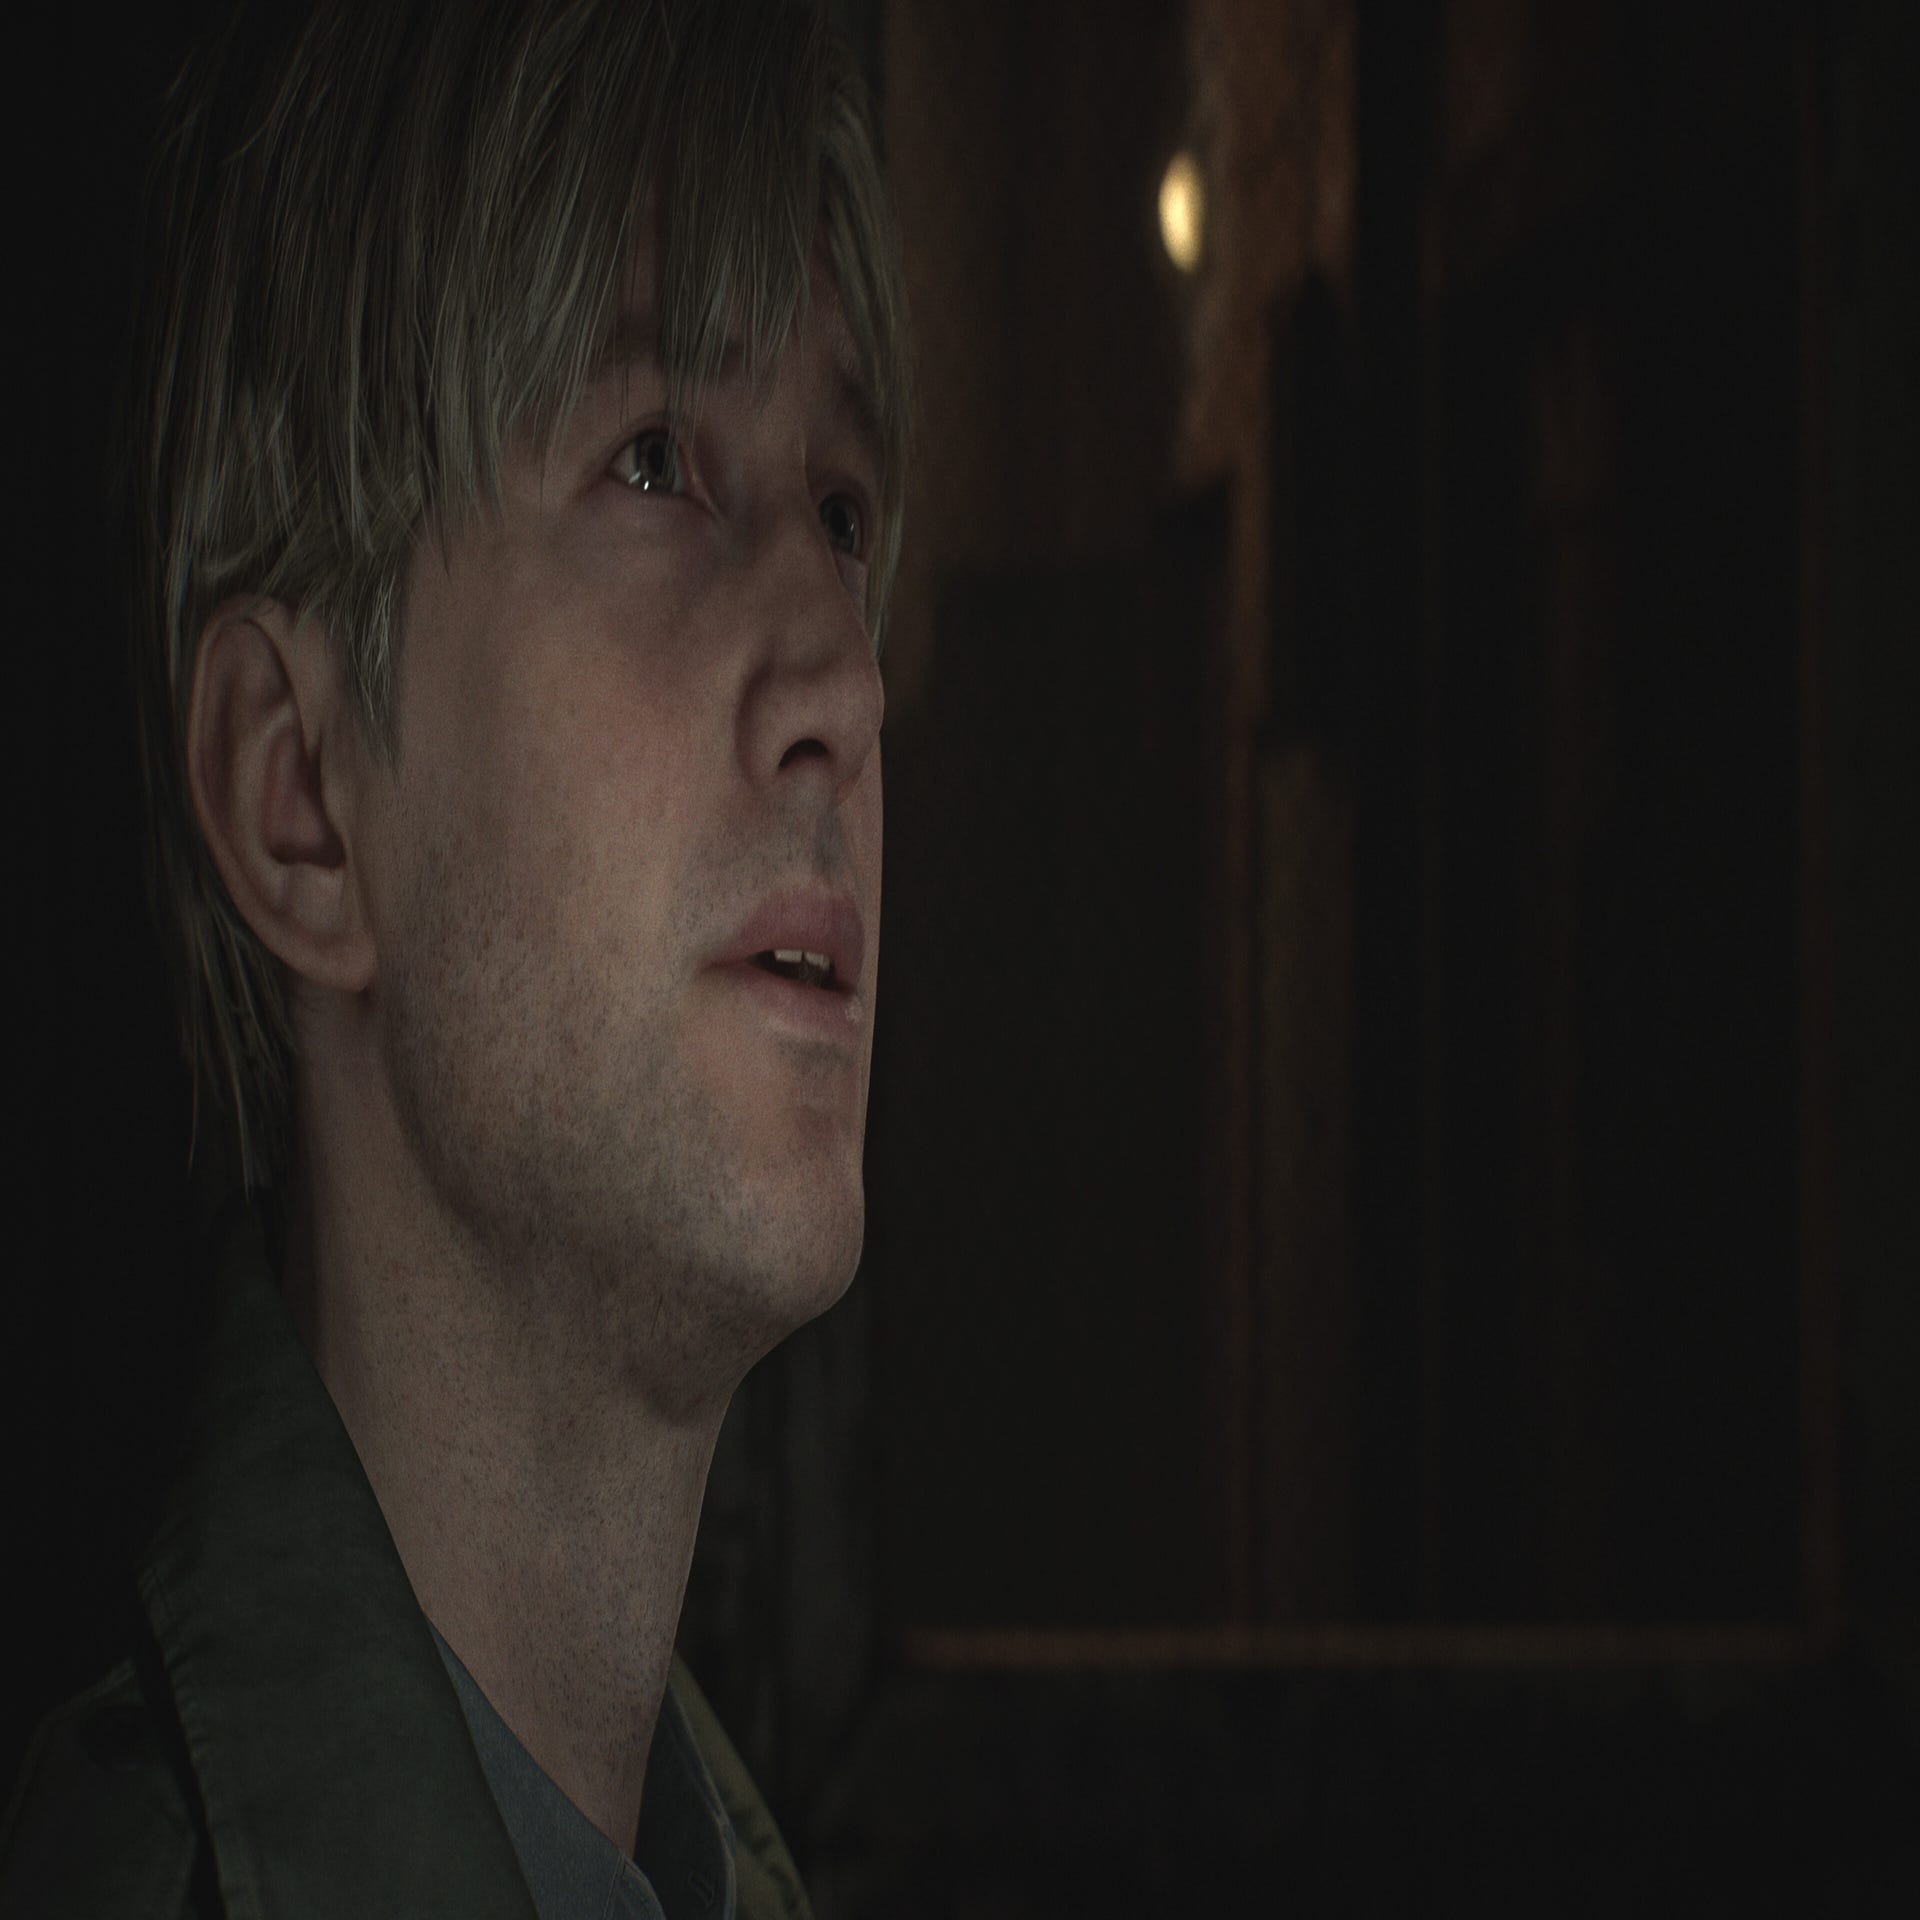 We watched the 13 minutes of Silent Hill 2 remake gameplay and it looks…OK